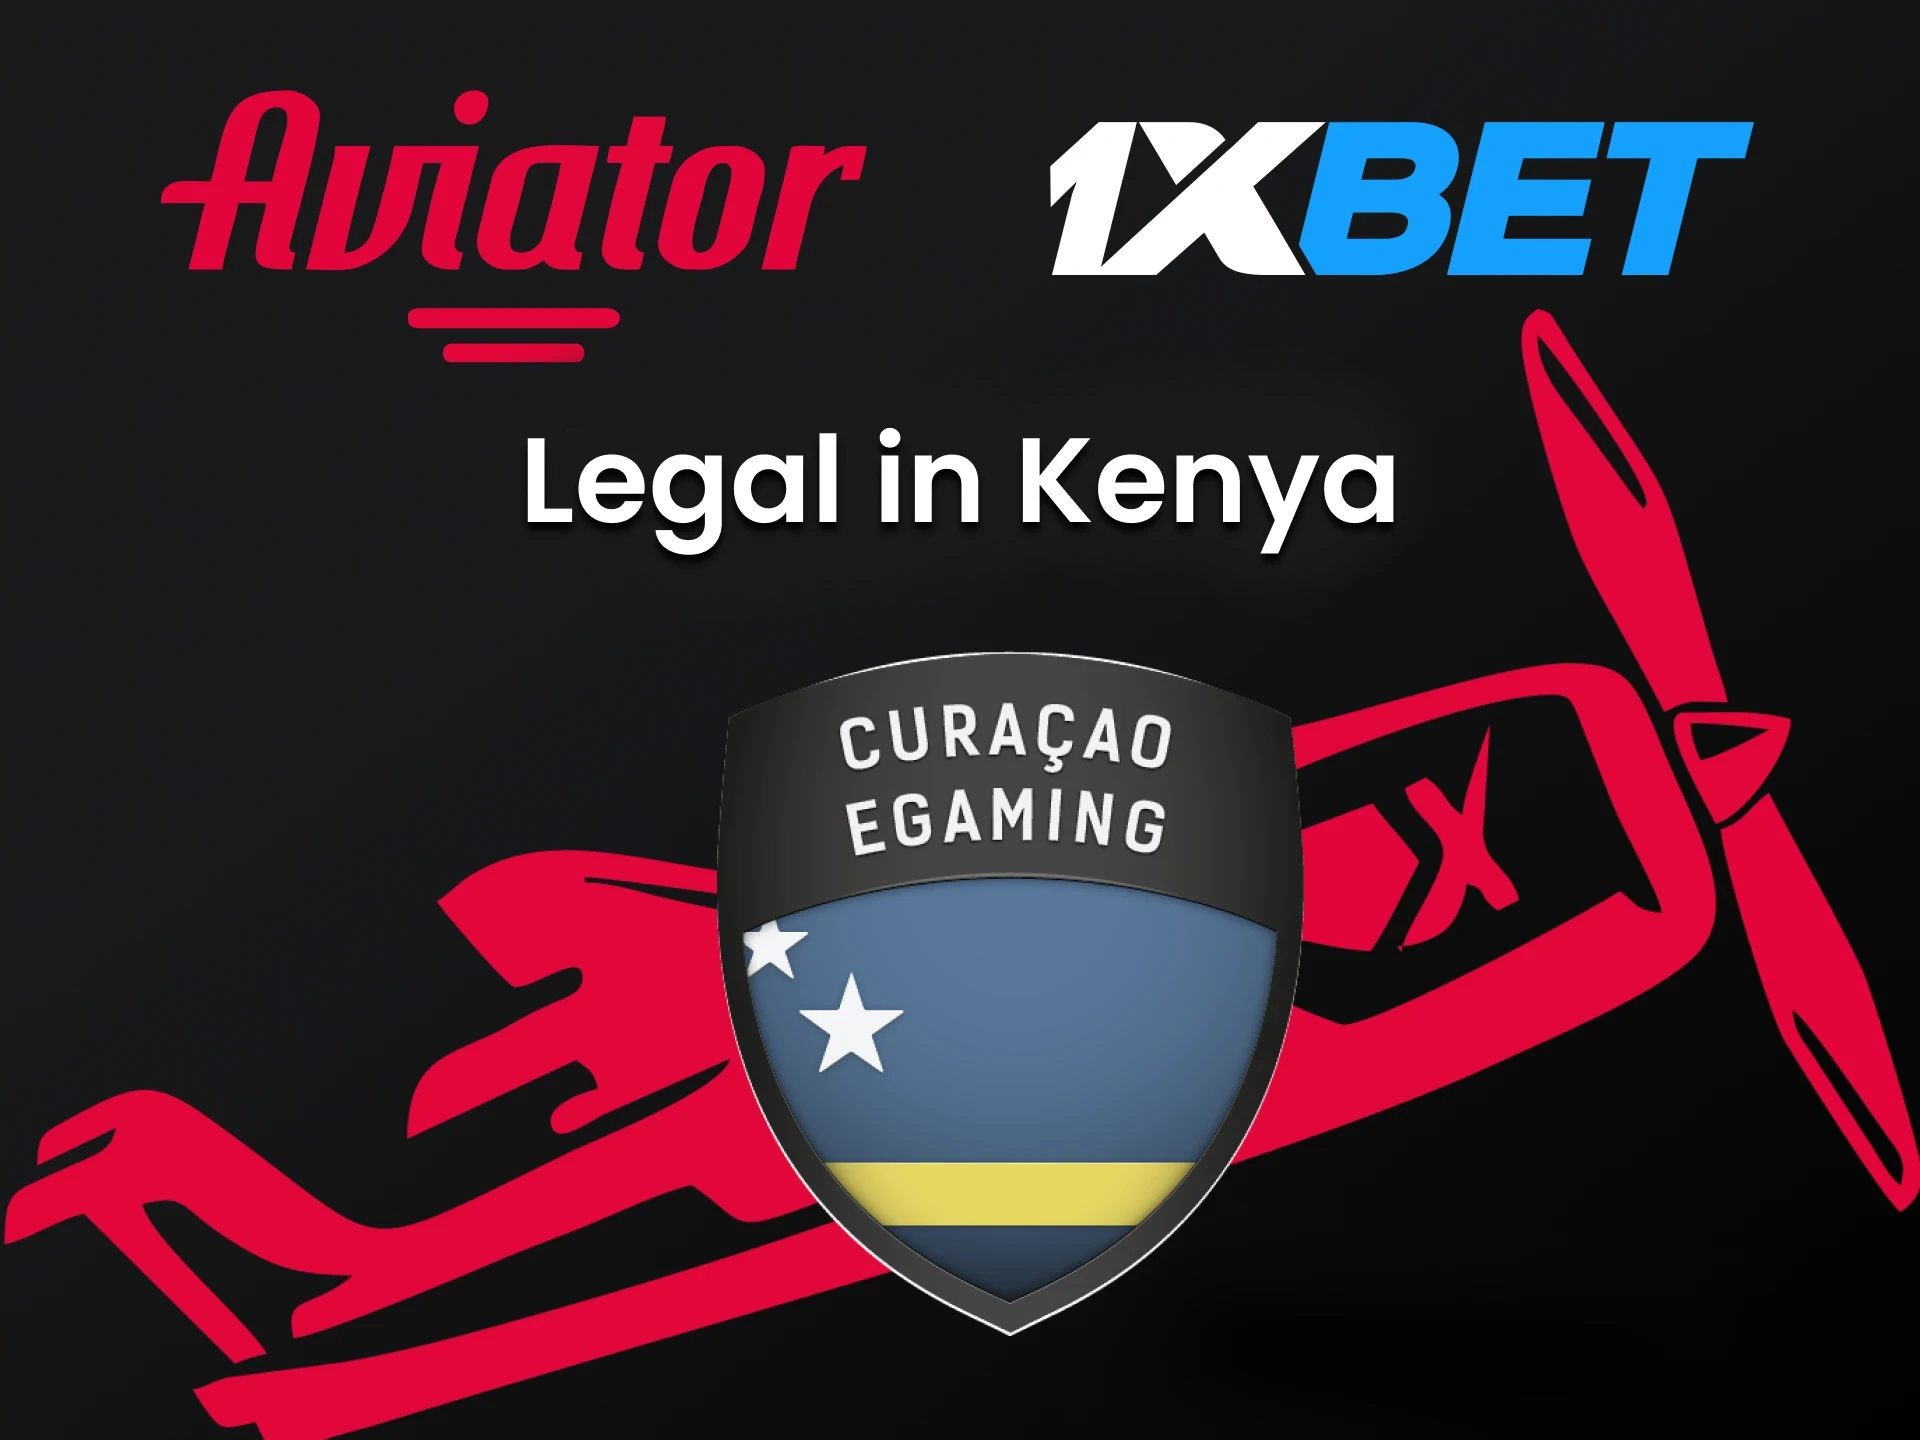 Playing Aviator at 1xBet is absolutely legal in Kenya.